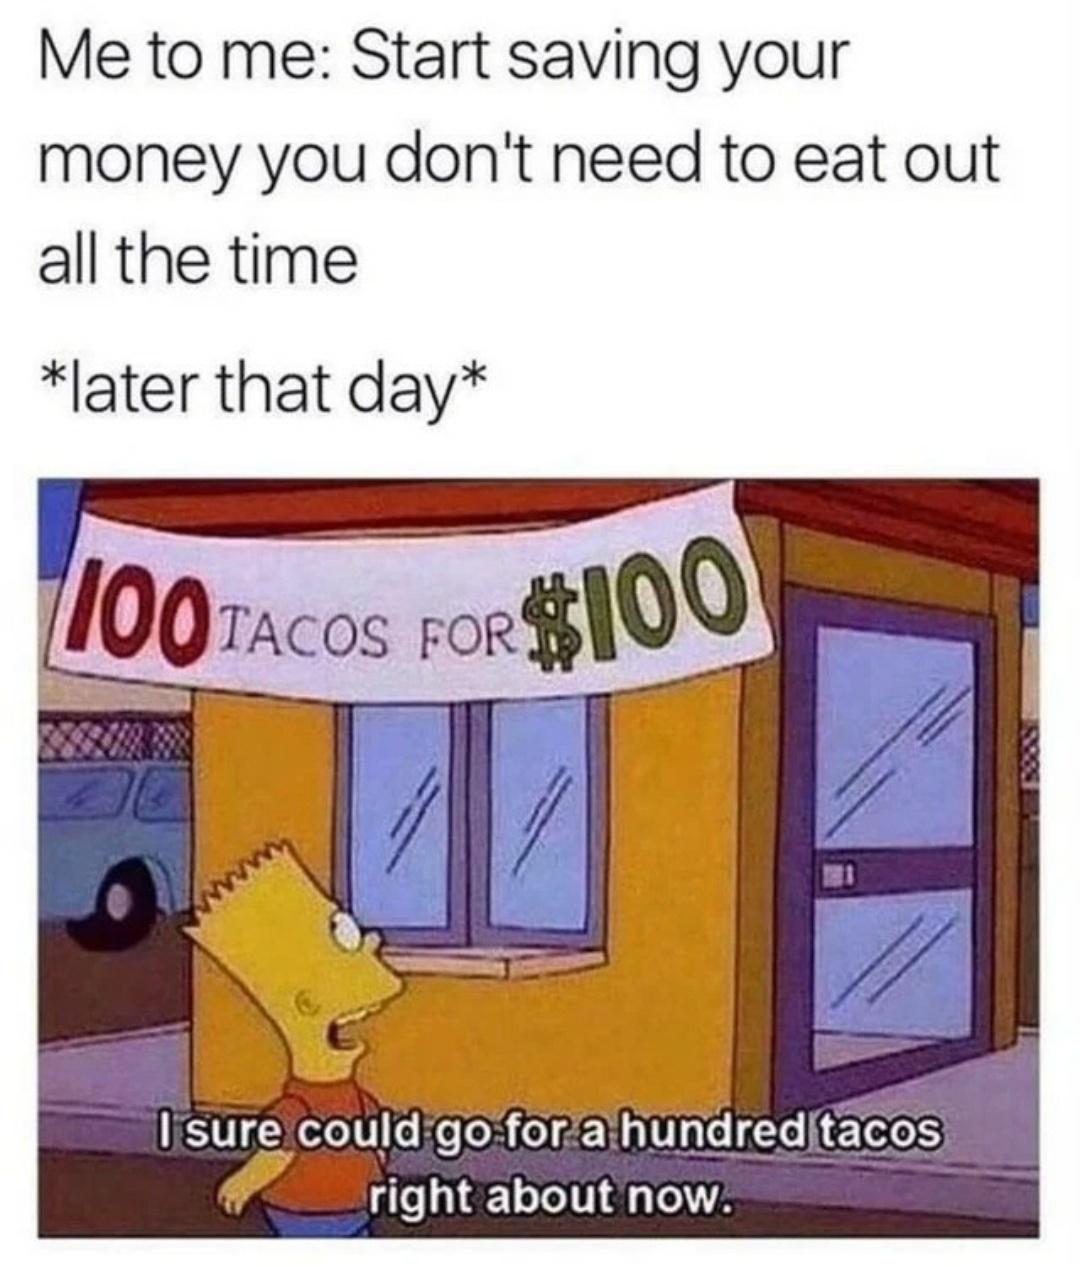 dank memes - saving money memes - Me to me Start saving your money you don't need to eat out all the time later that day 100TACOS For $100 I sure could go for a hundred tacos right about now.